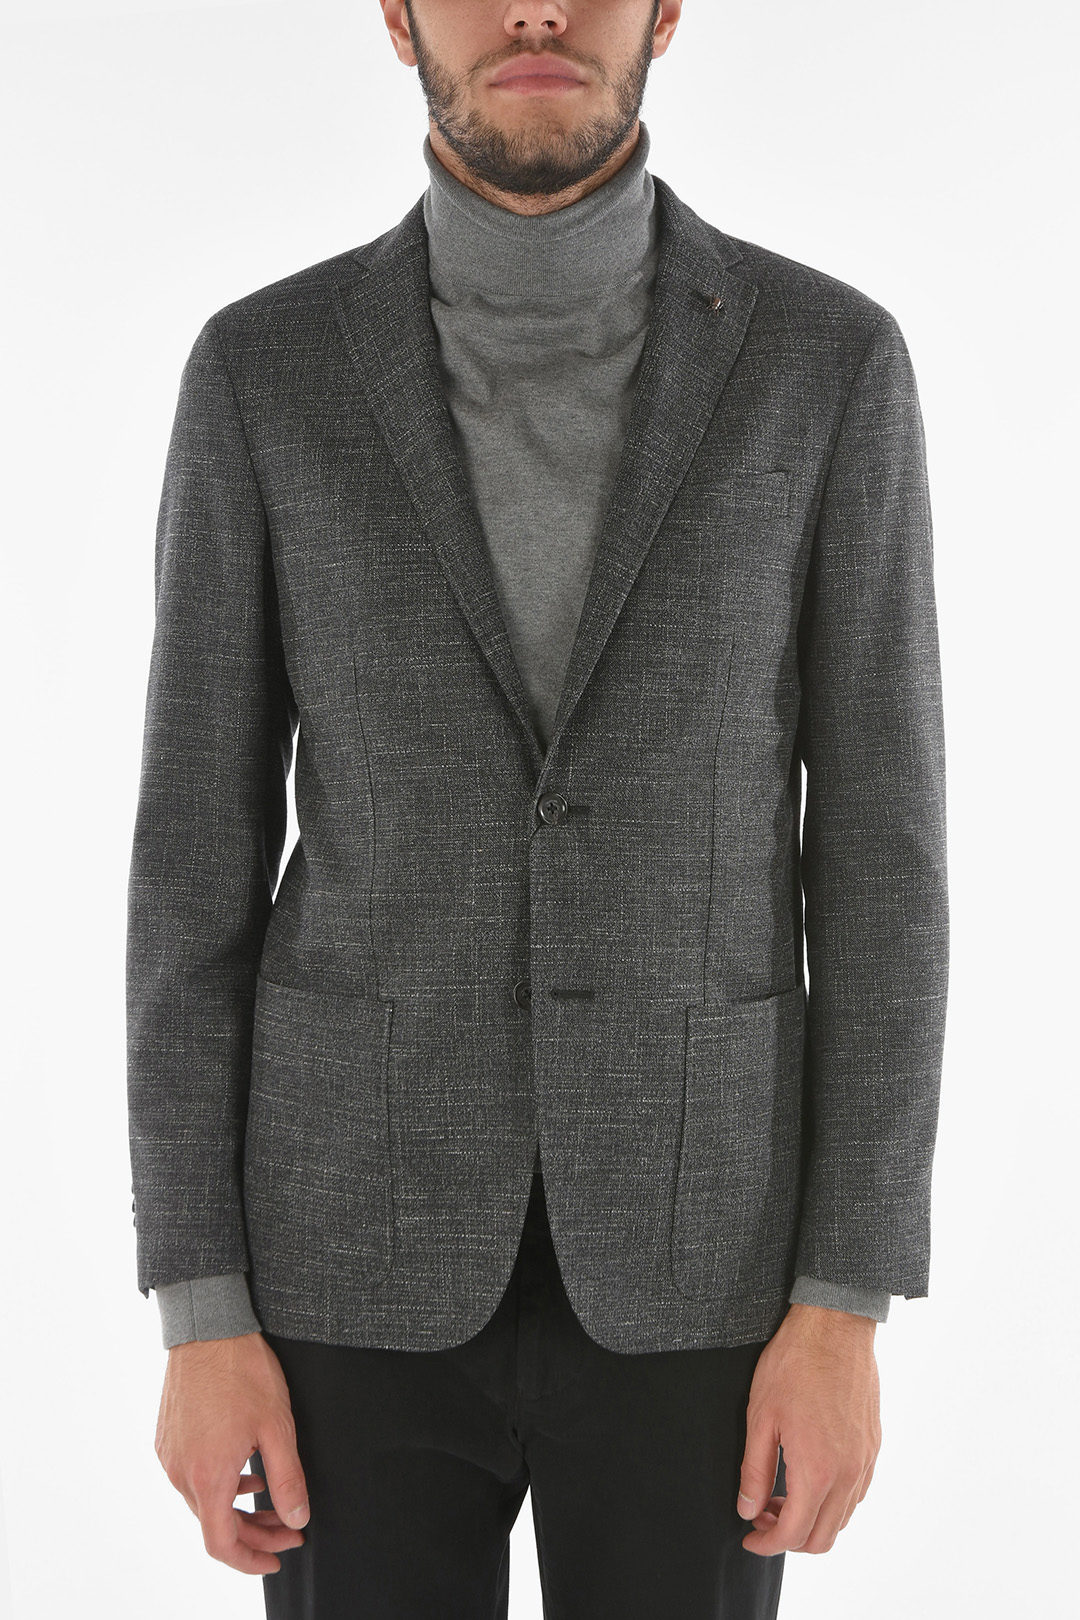 Corneliani CC COLLECTION 2 Button Blazer RIGHT with Patch Pocket men ...